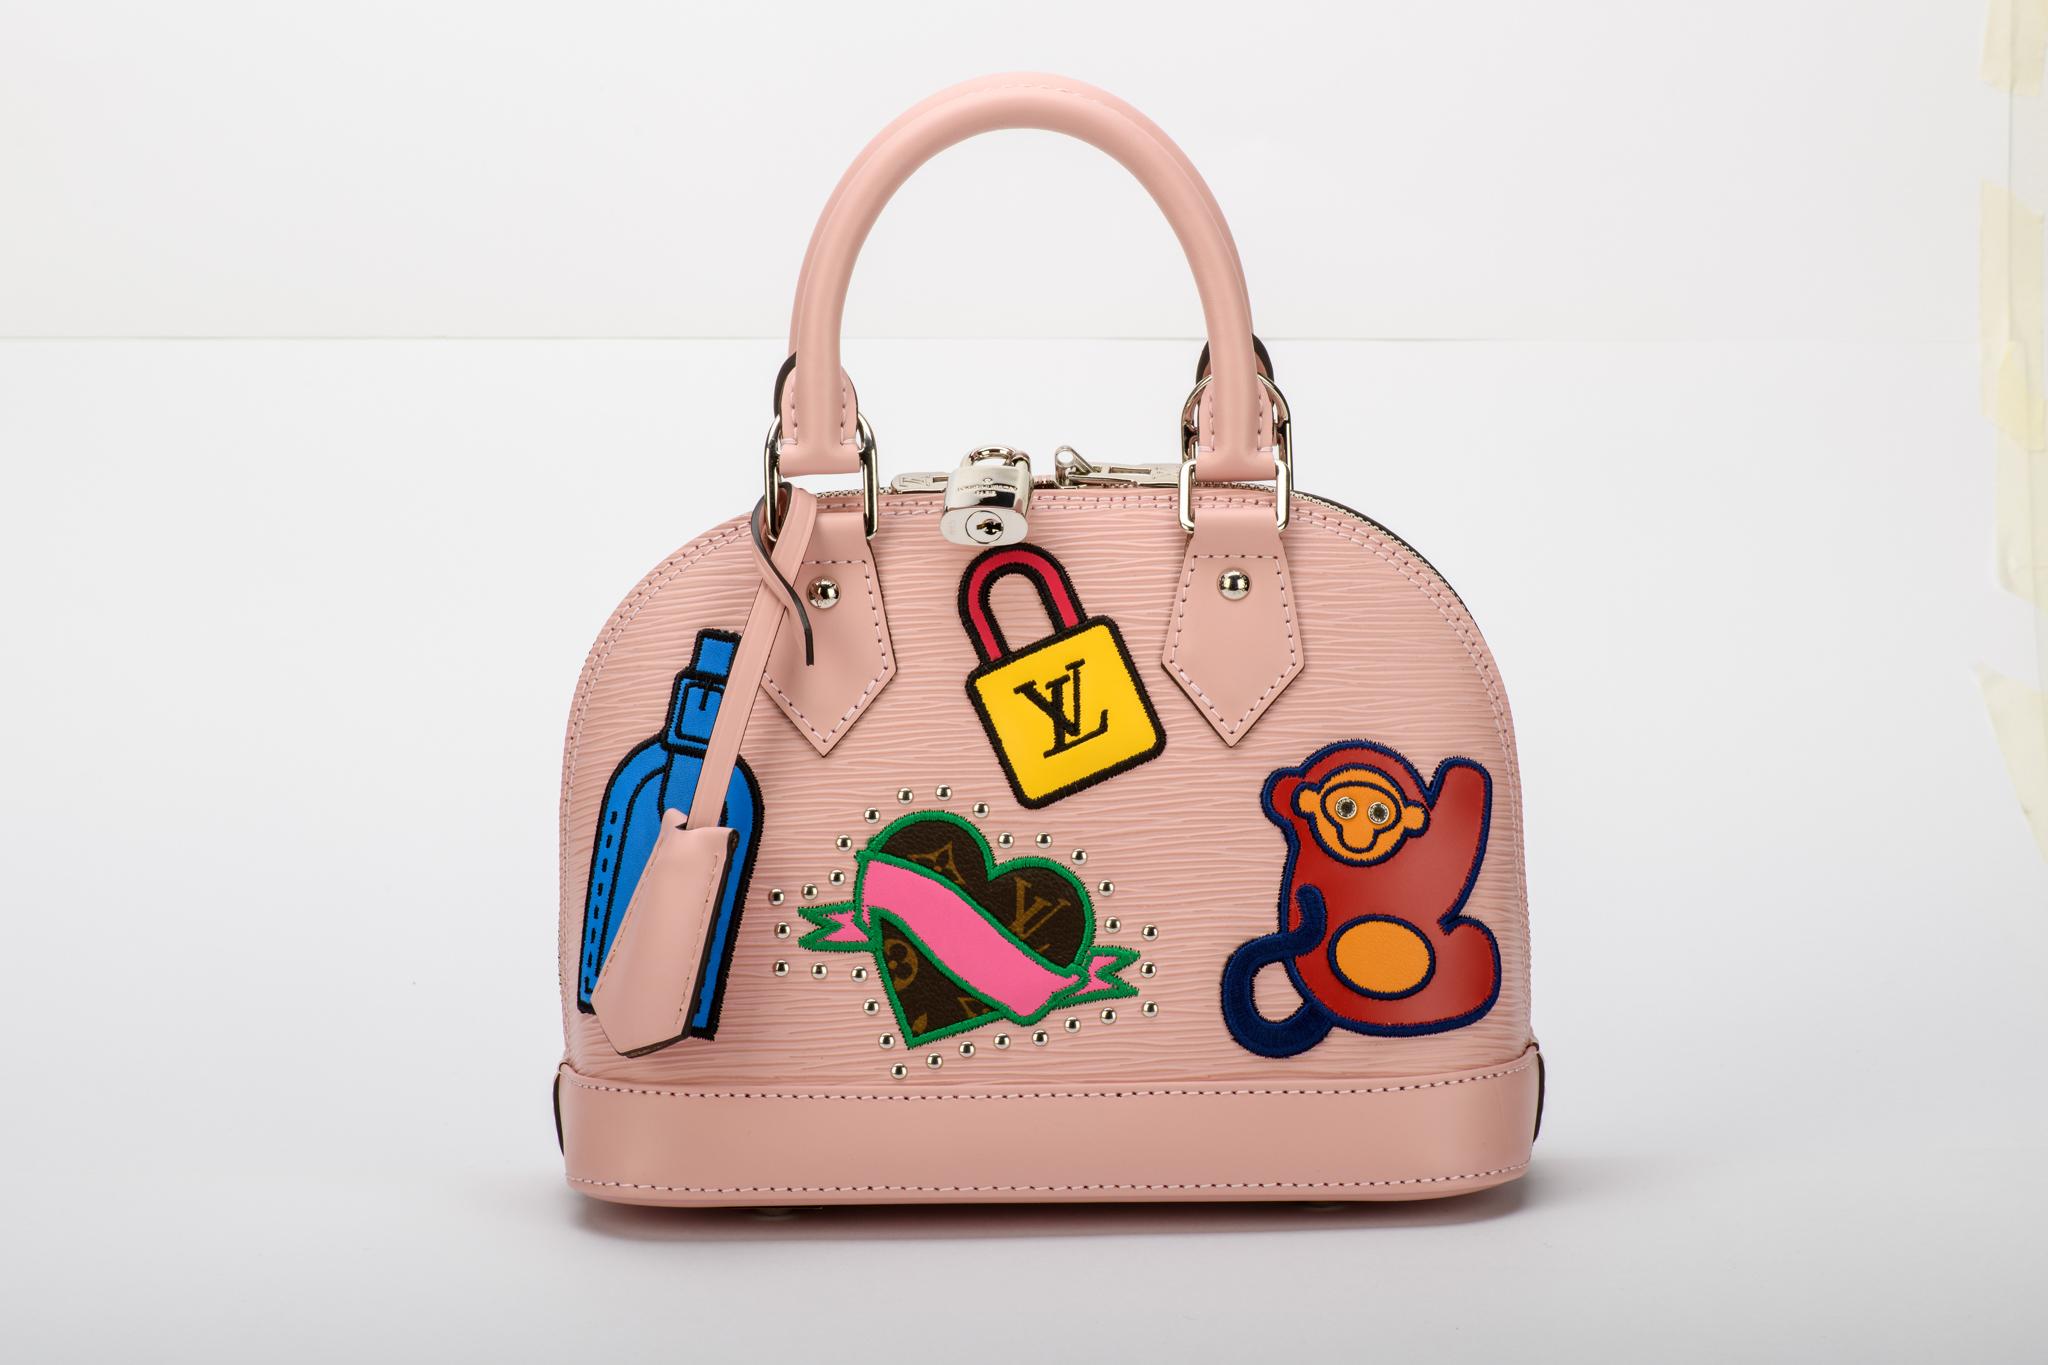 Louis Vuitton limited edition baby pink epi small alma bag with colorful stickers. Handle drop 10cm, shoulder strap 113cm. Comes with lock and 2 keys, dust cover, booklet and box.
